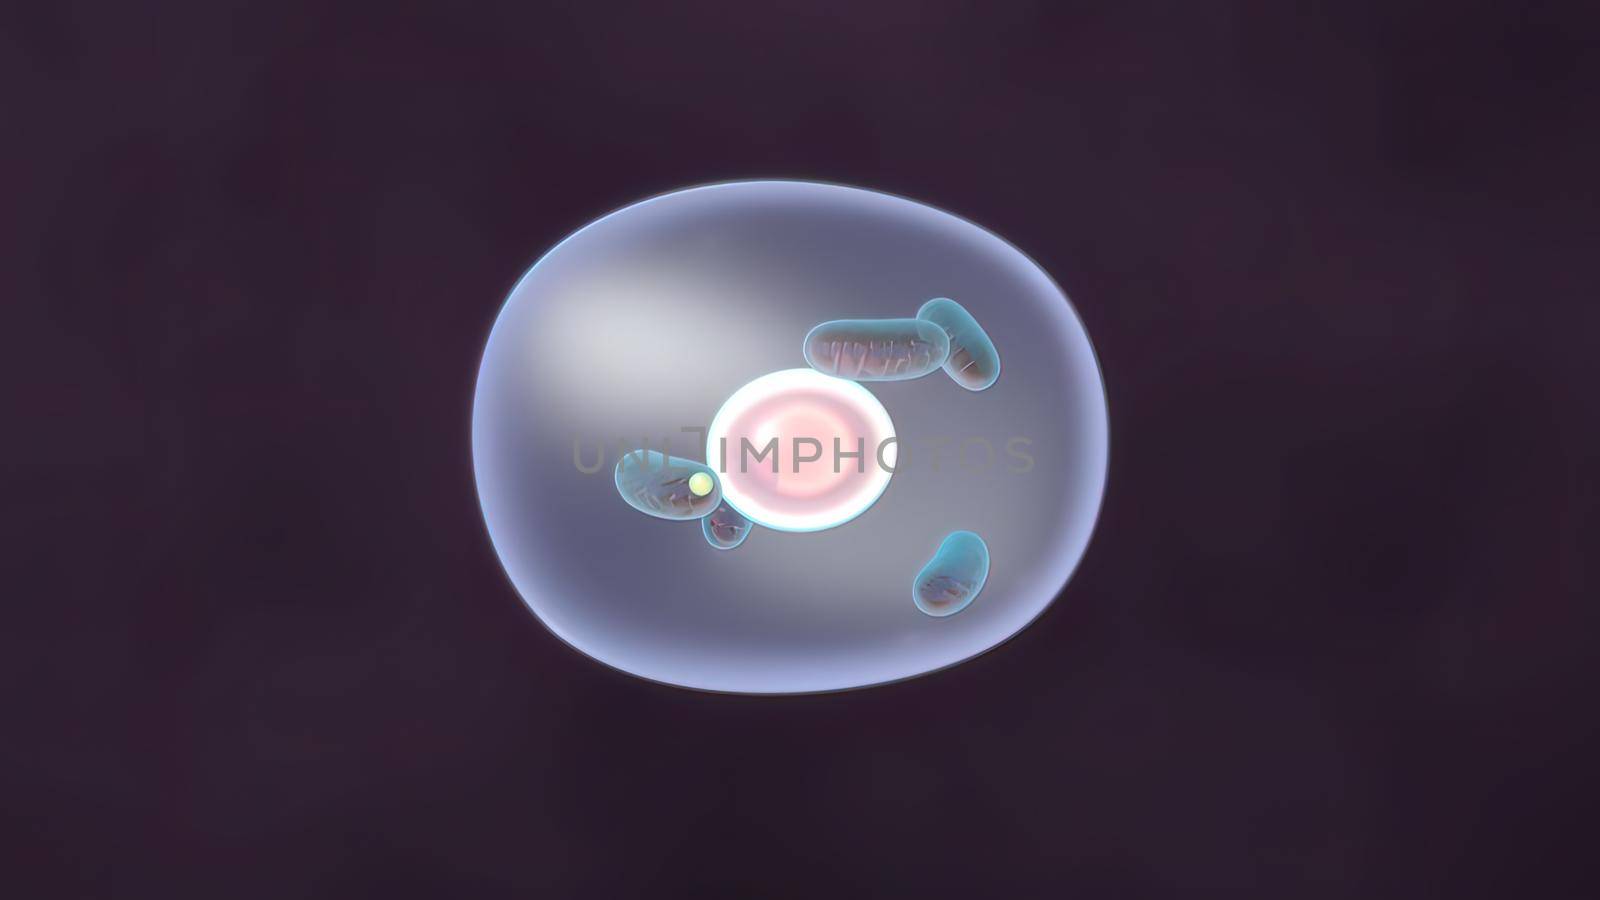 DNA mitochondrial DNA Mitochondria, a membrane enclosed cellular organelles which produce energy Mitochondria Cell energy and Cellular respiration Mitochondrial disease 3D illustration